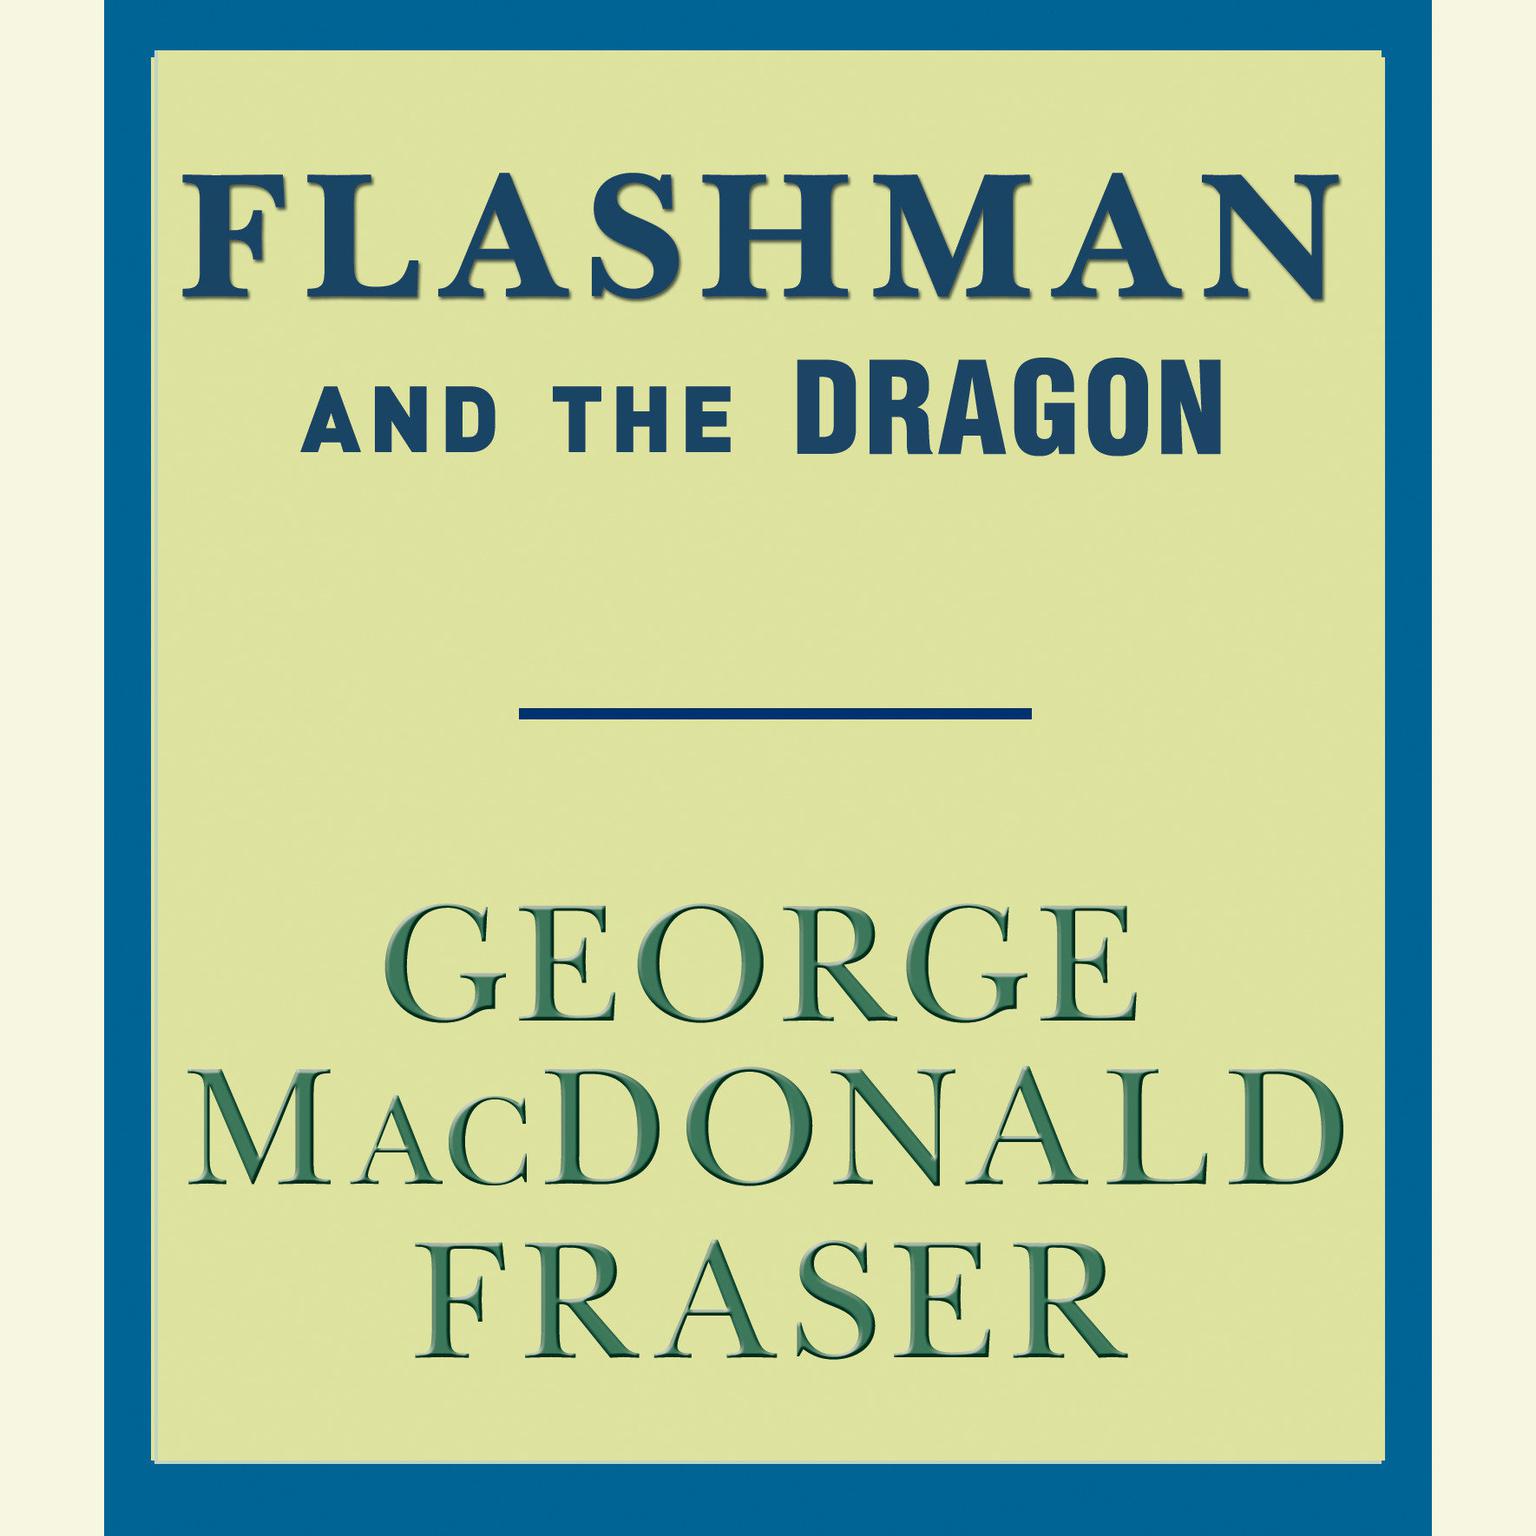 Flashman and the Dragon Audiobook, by George MacDonald Fraser